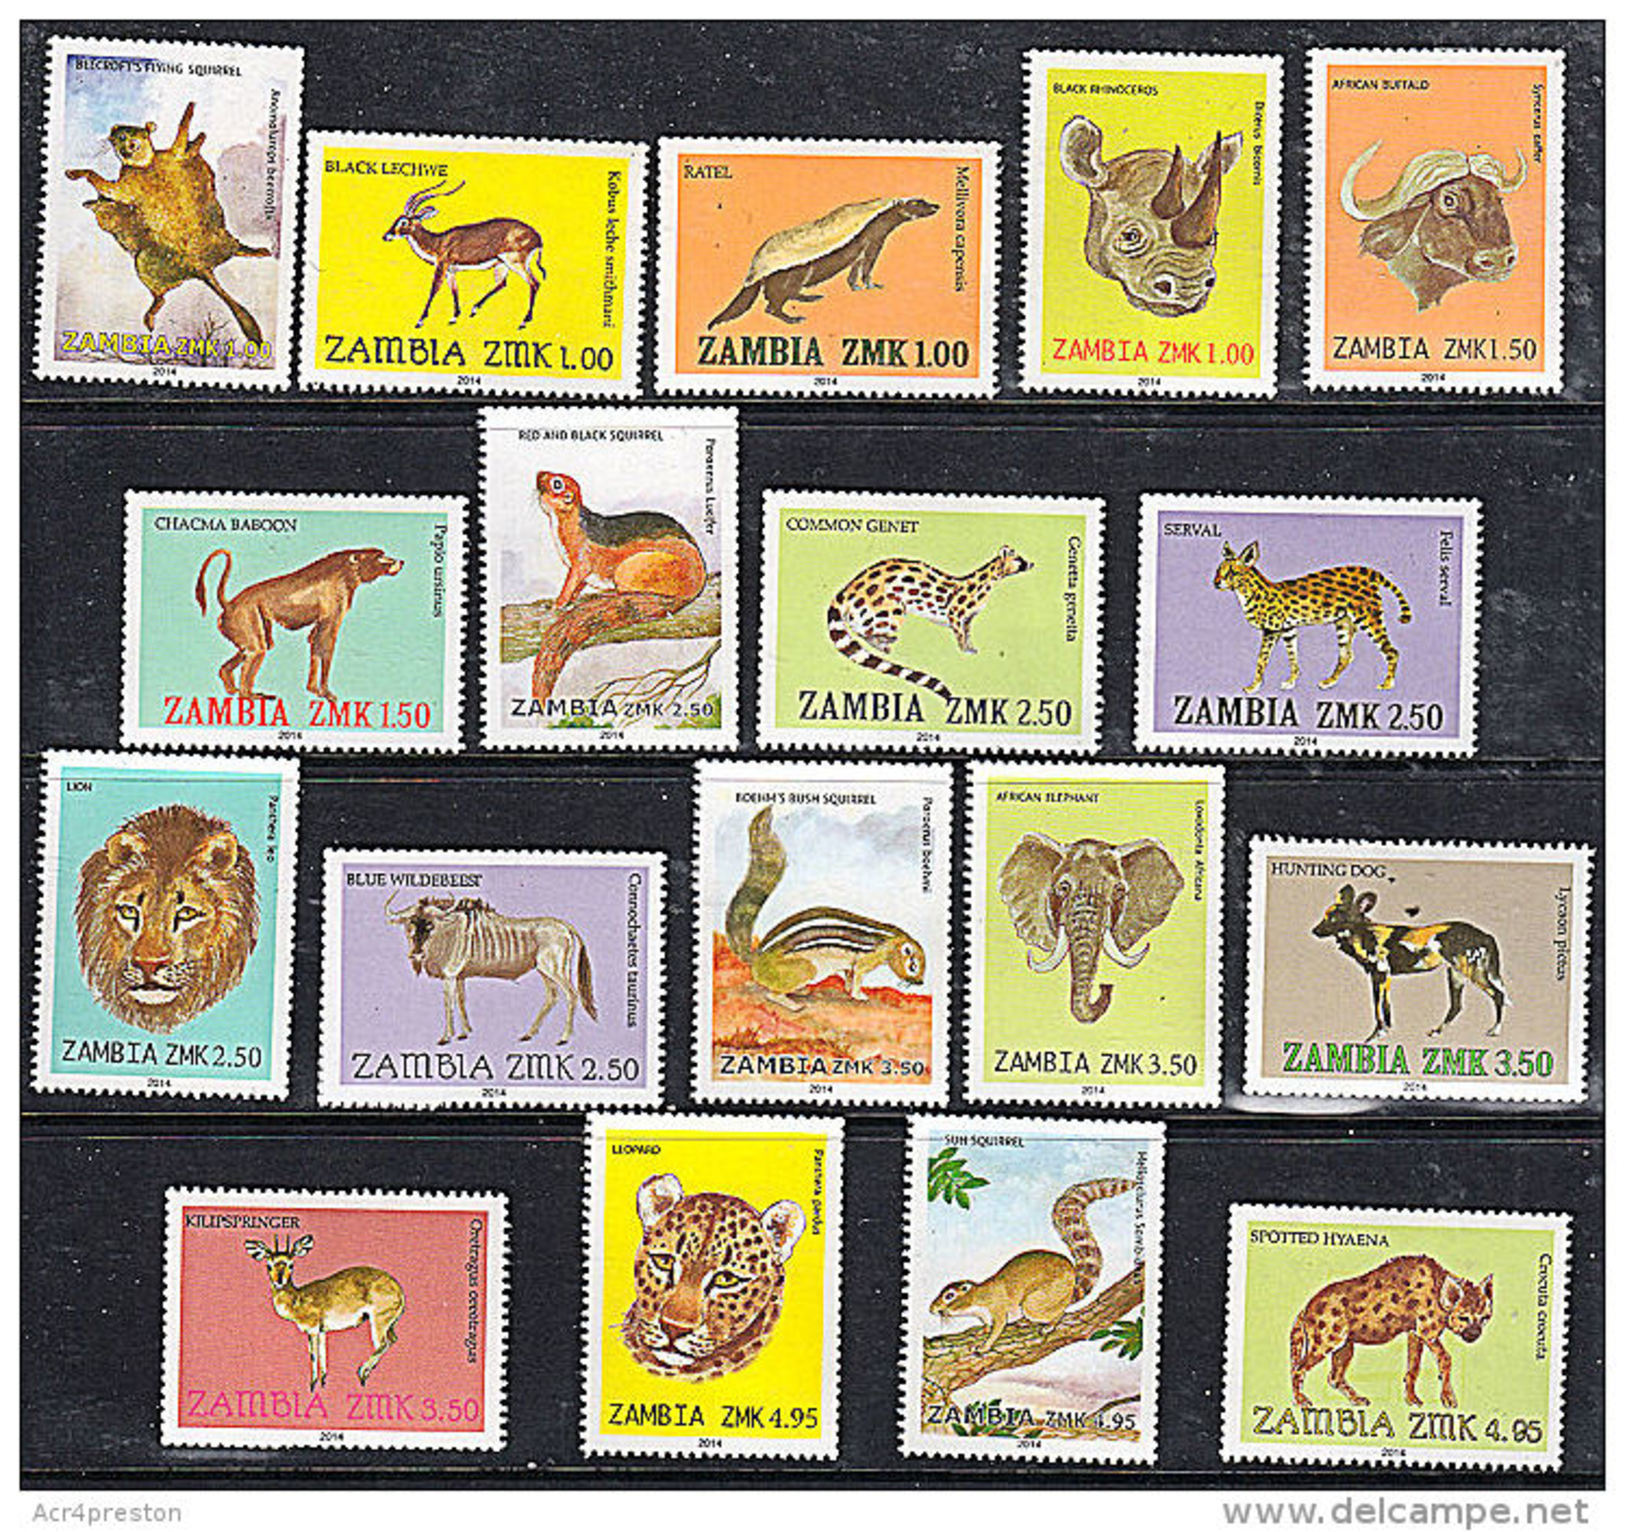 Zm1134 ZAMBIA 2014, NEW ISSUE, 3rd Issue Of Animals Set, In New Currency,  MNH - Zambia (1965-...)